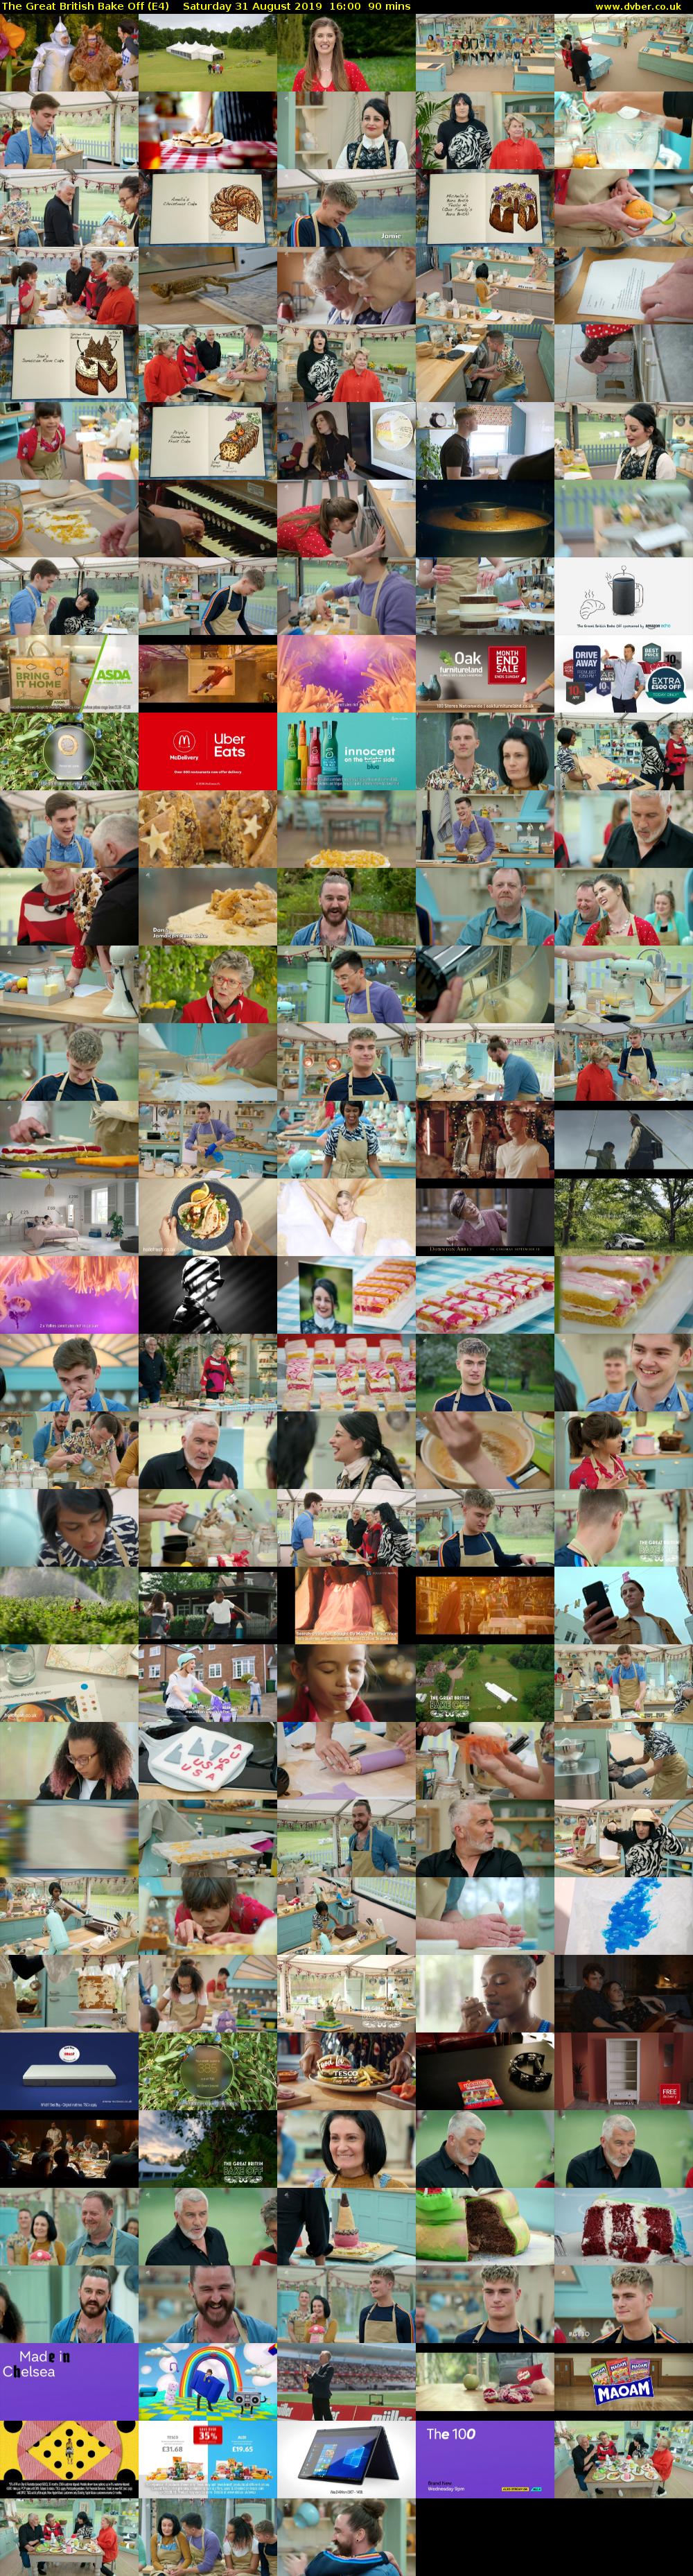 The Great British Bake Off (E4) Saturday 31 August 2019 16:00 - 17:30